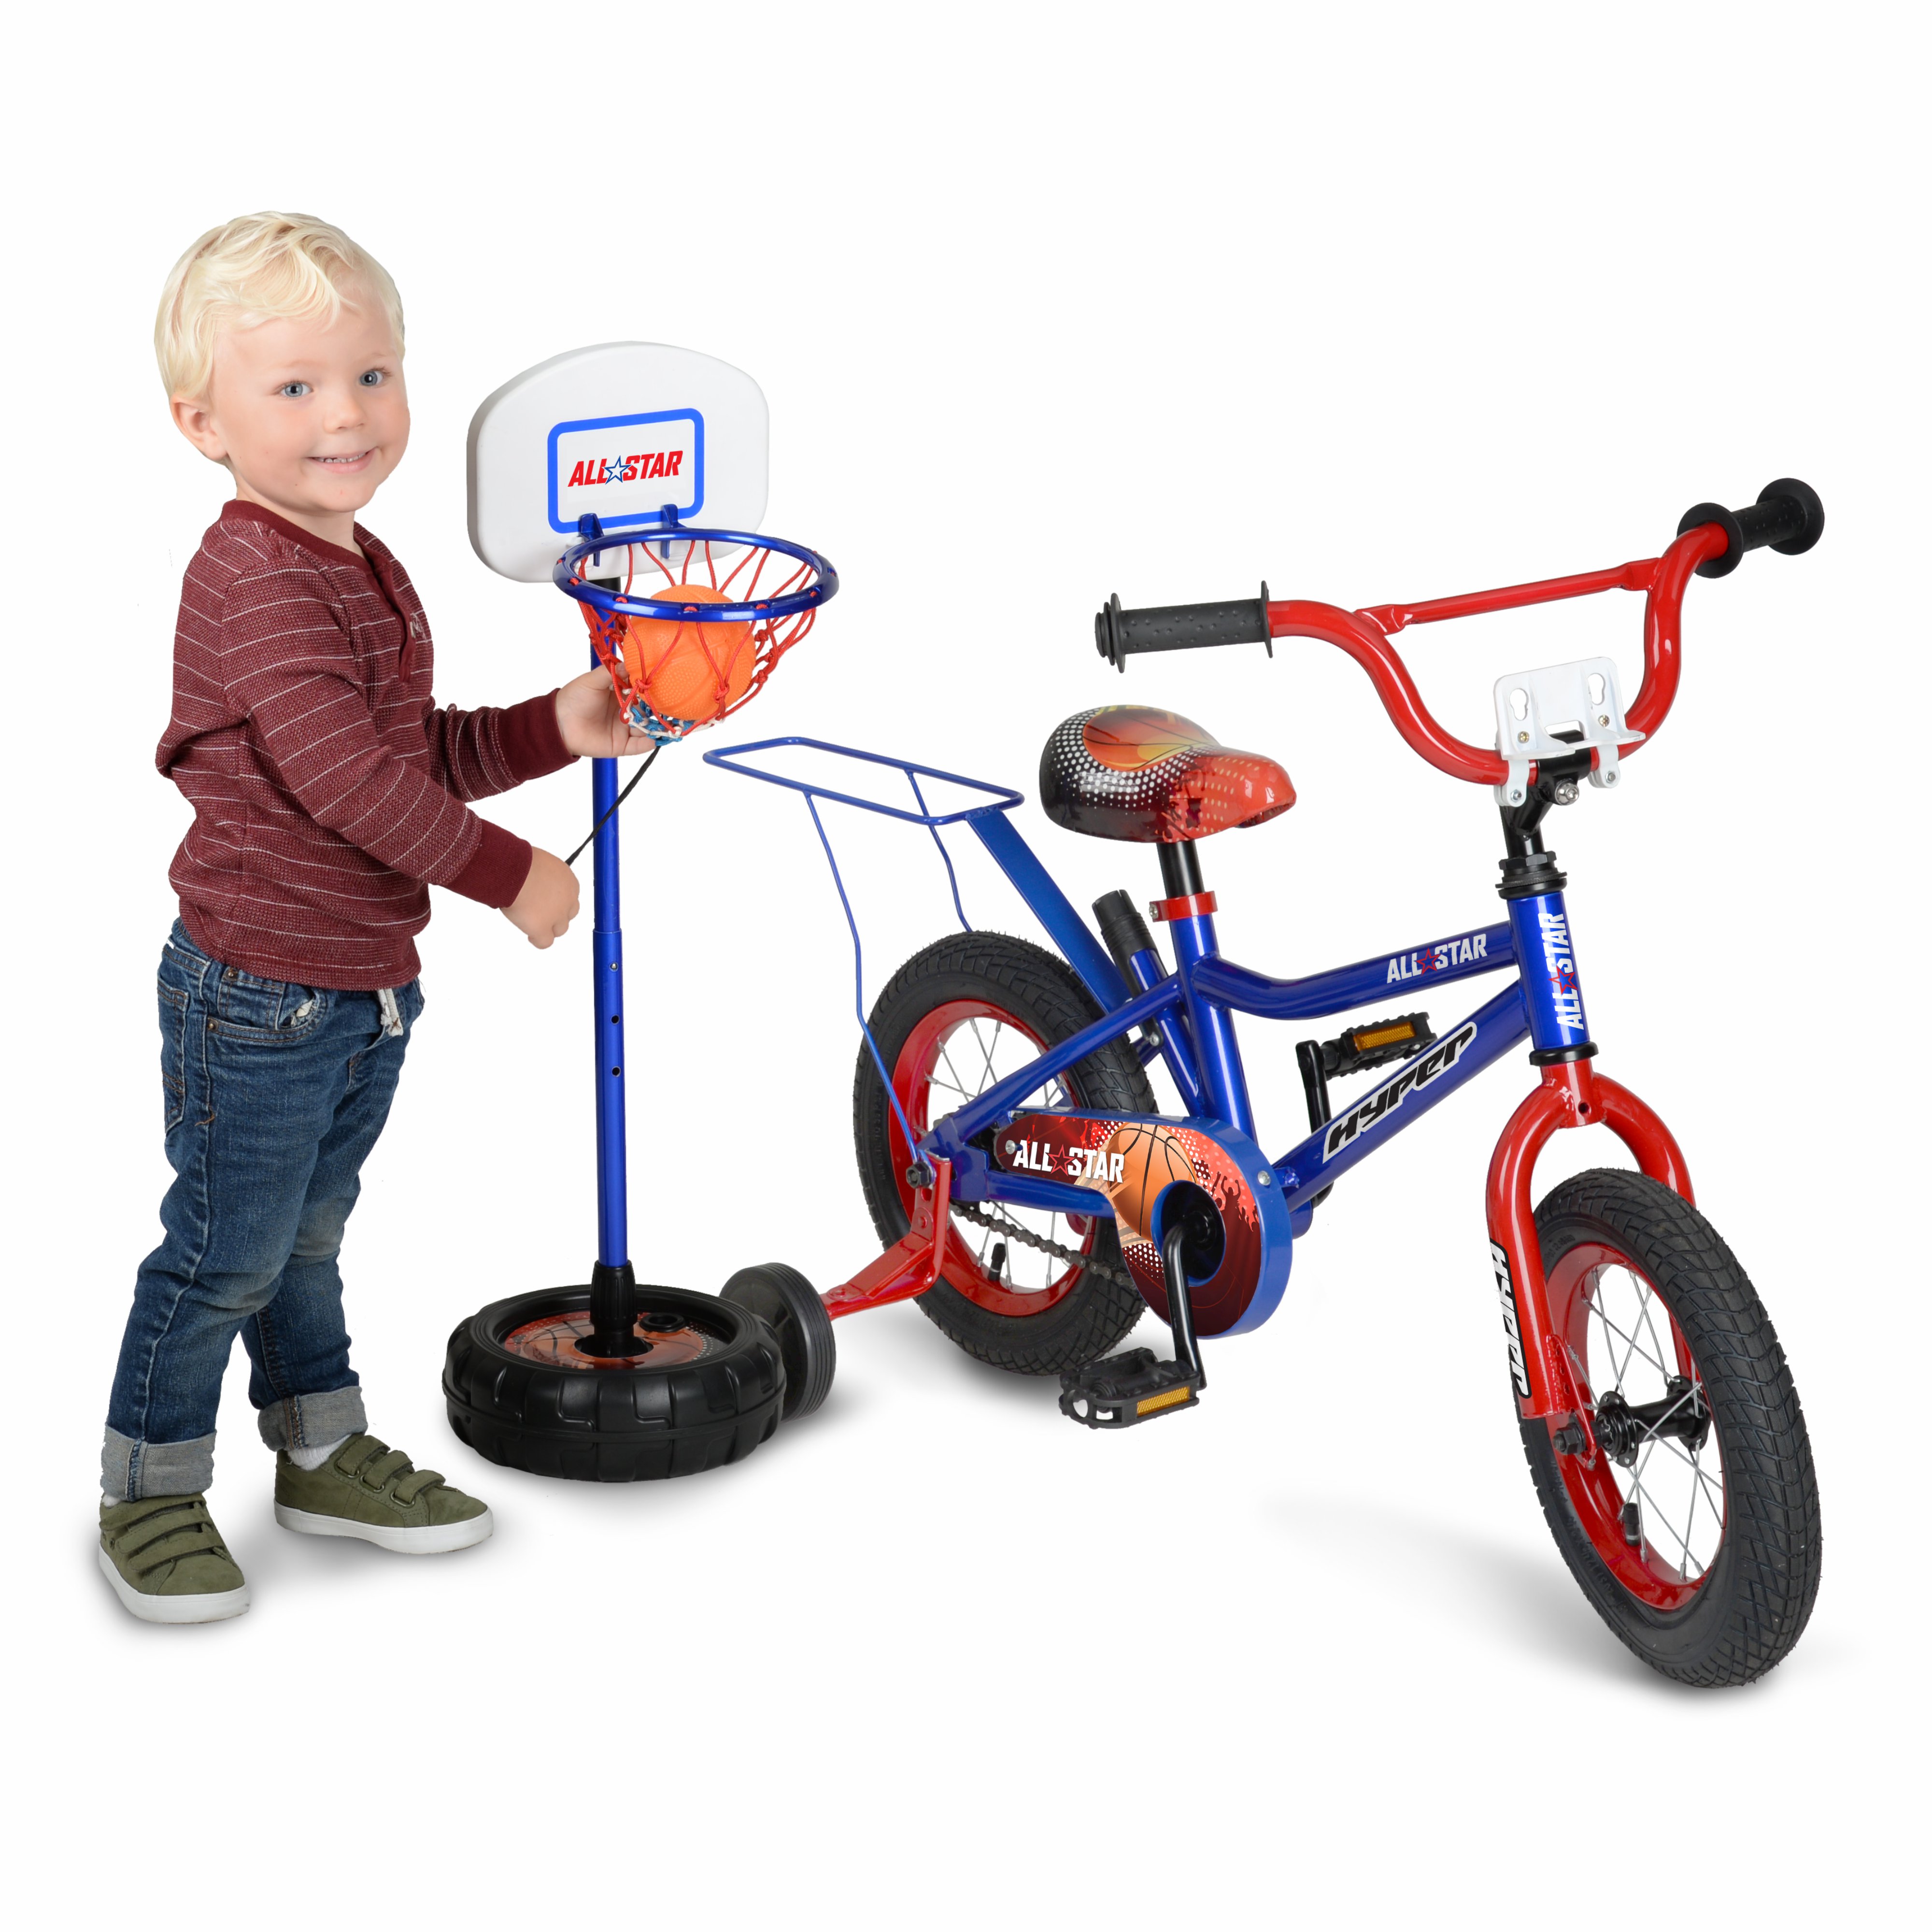 Hyper Bicycles 12" All Star Basketball Bike, with Training Wheels, for Kids Ages 3-5 Years, Basketball Hoop - image 2 of 3